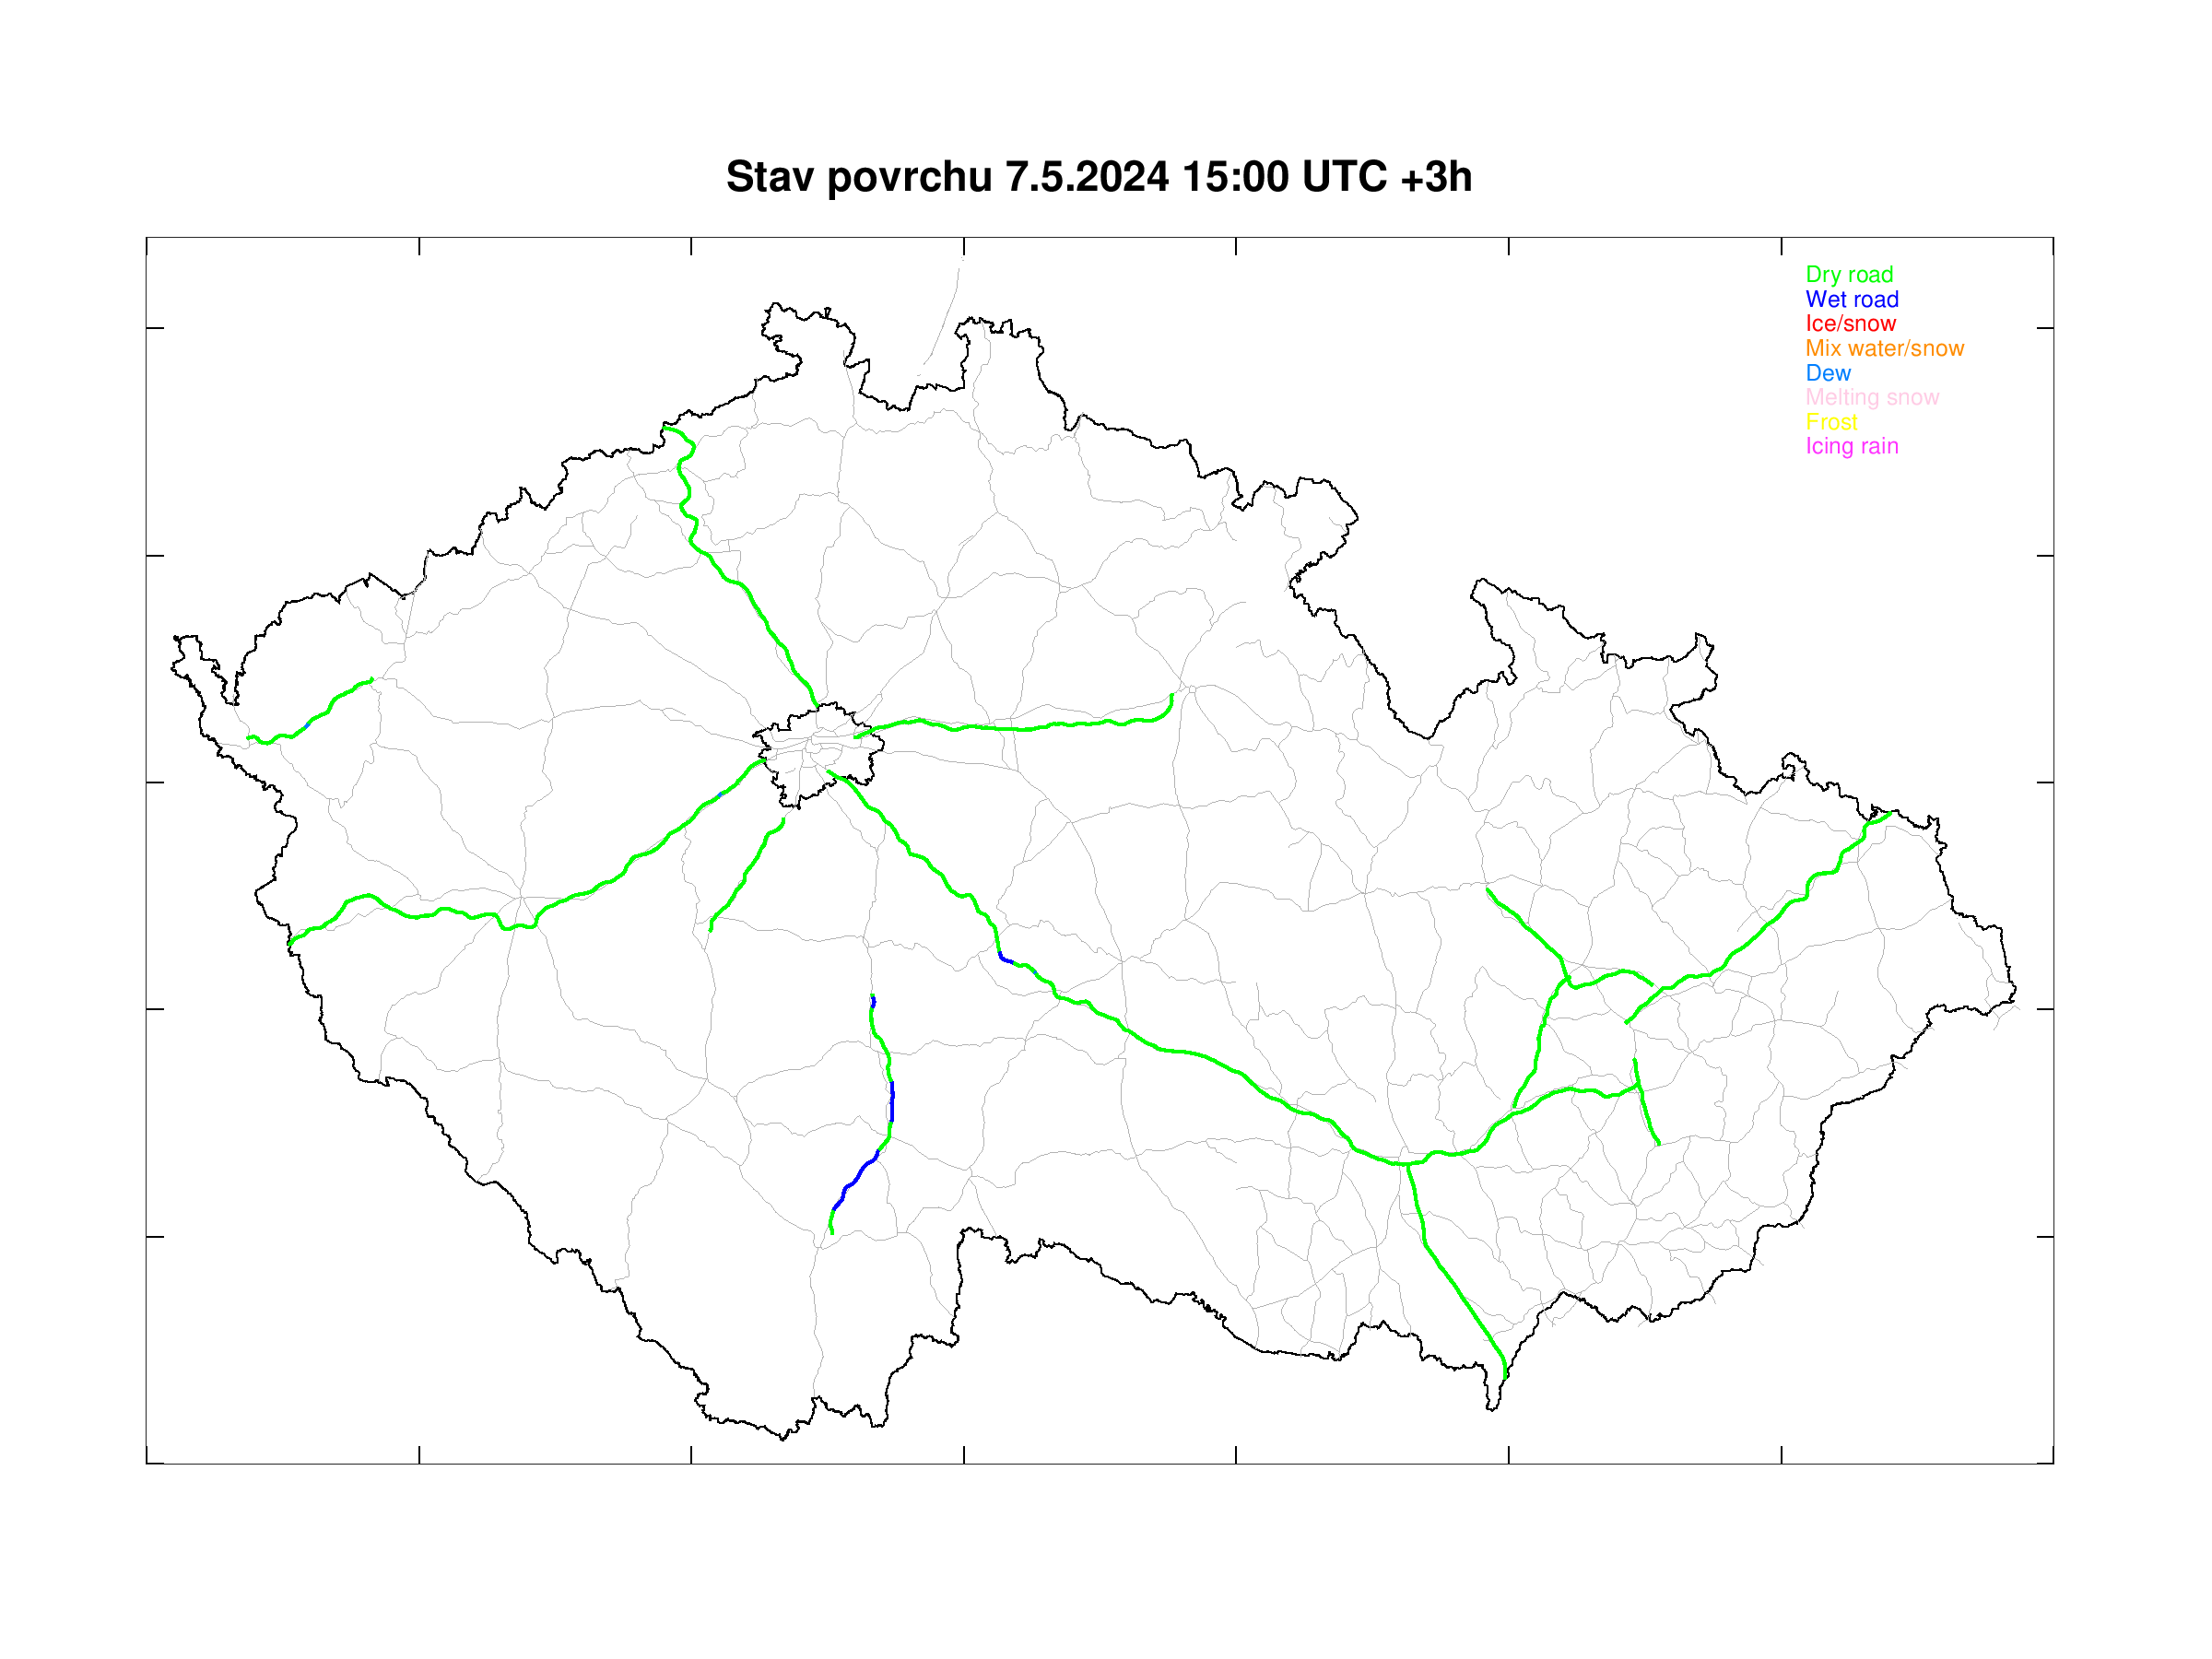 Road surface condition forecast for Czech highways +3h